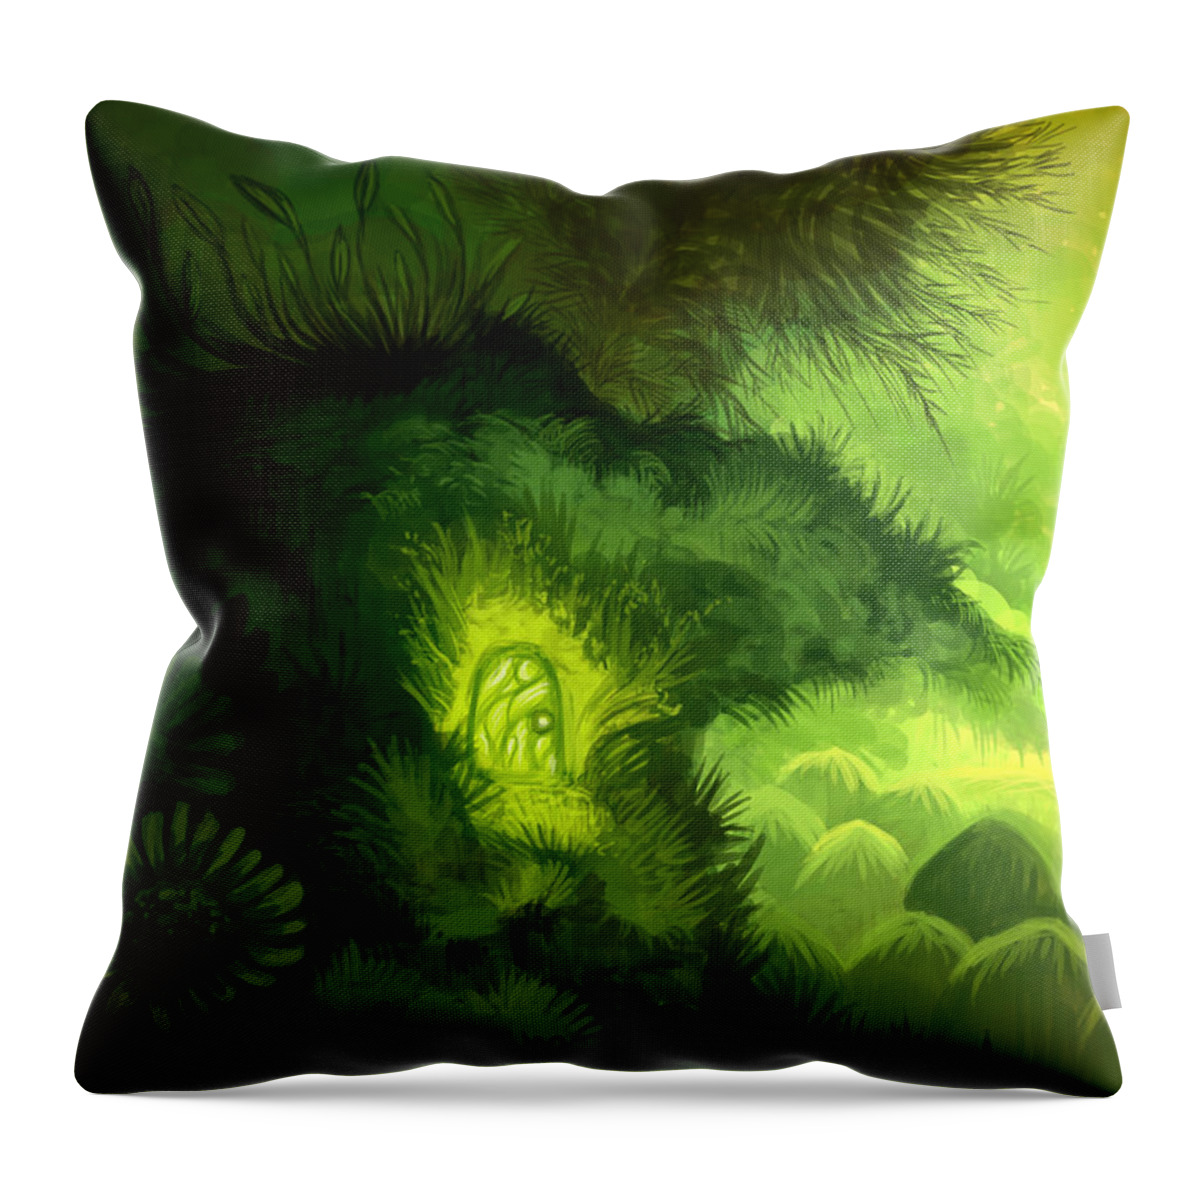 Grass Throw Pillow featuring the digital art Moss Illustration by Illustrations By Annemarie Rysz